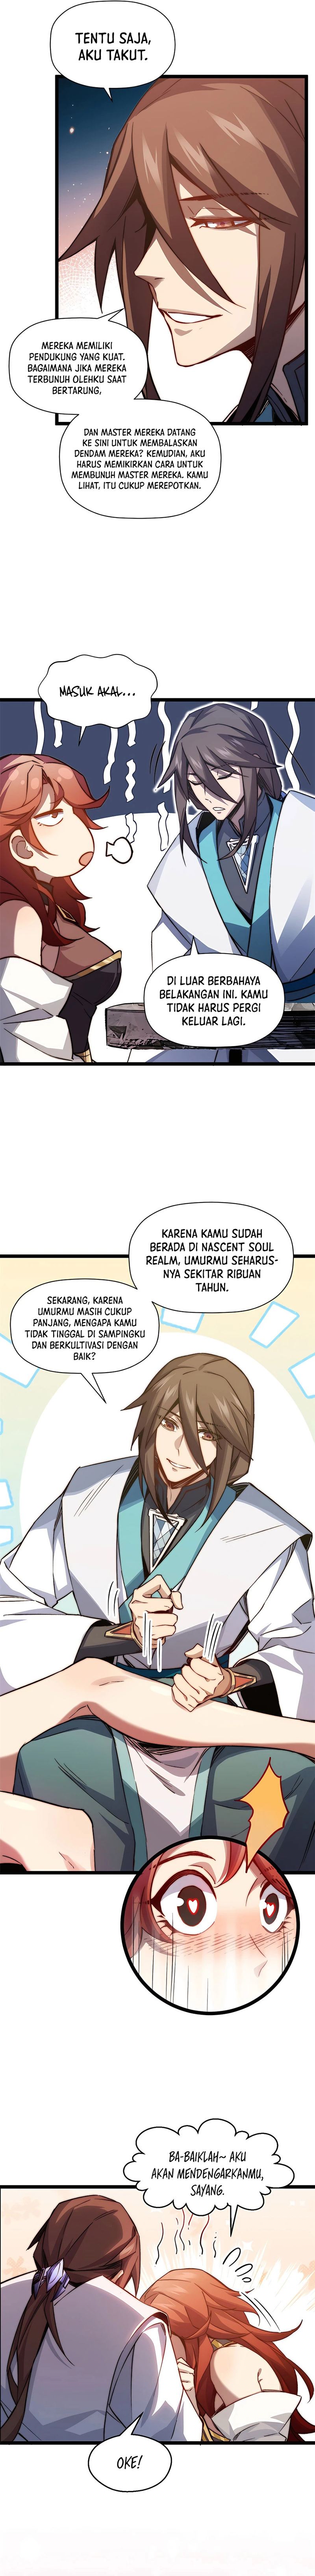 Dilarang COPAS - situs resmi www.mangacanblog.com - Komik top tier providence secretly cultivate for a thousand years 130 - chapter 130 131 Indonesia top tier providence secretly cultivate for a thousand years 130 - chapter 130 Terbaru 4|Baca Manga Komik Indonesia|Mangacan